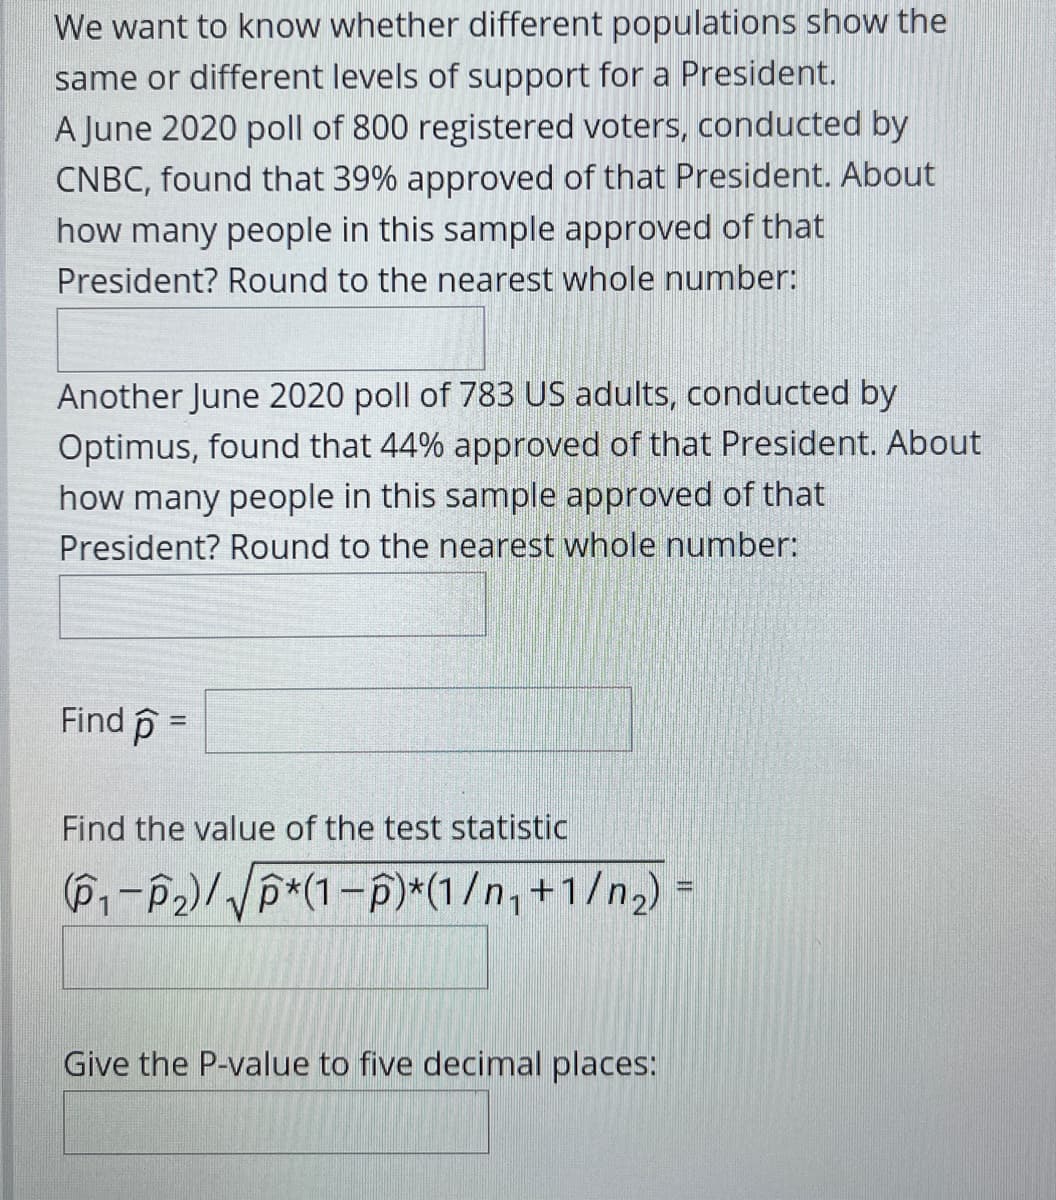 We want to know whether different populations show the
same or different levels of support for a President.
A June 2020 poll of 800 registered voters, conducted by
CNBC, found that 39% approved of that President. About
how many people in this sample approved of that
President? Round to the nearest whole number:
Another June 2020 poll of 783 US adults, conducted by
Optimus, found that 44% approved of that President. About
how many people in this sample approved of that
President? Round to the nearest whole number:
Find p =
%3!
Find the value of the test statistic
(P-P2)/VP*(1-p)*(1/n, +1/n2)
Give the P-value to five decimal places:
